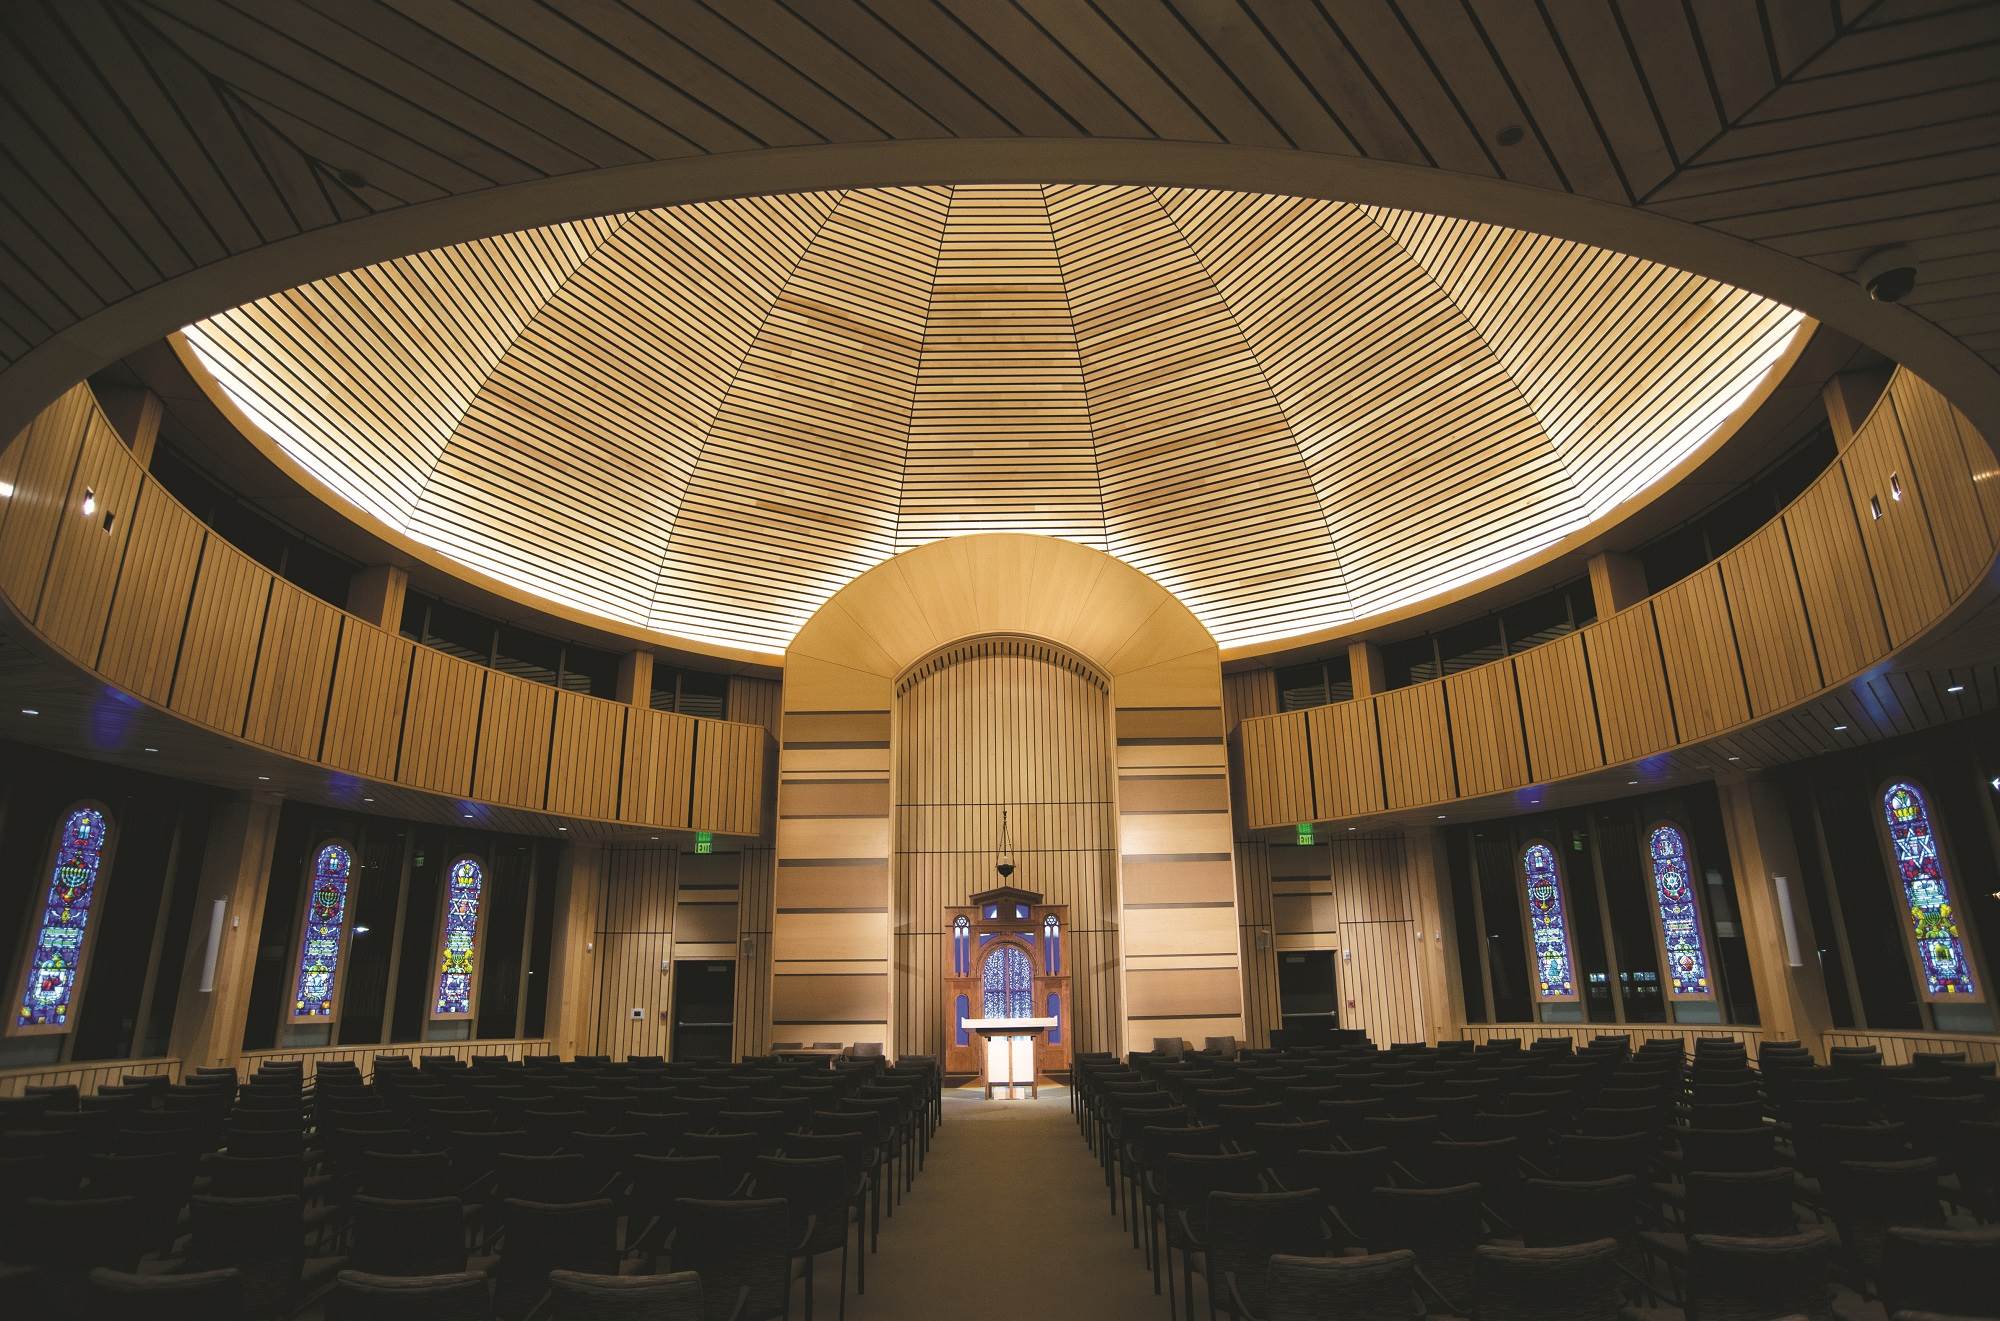 THE TEMPLE – TIFERETH ISRAEL | EXPANSION AND RENOVATION